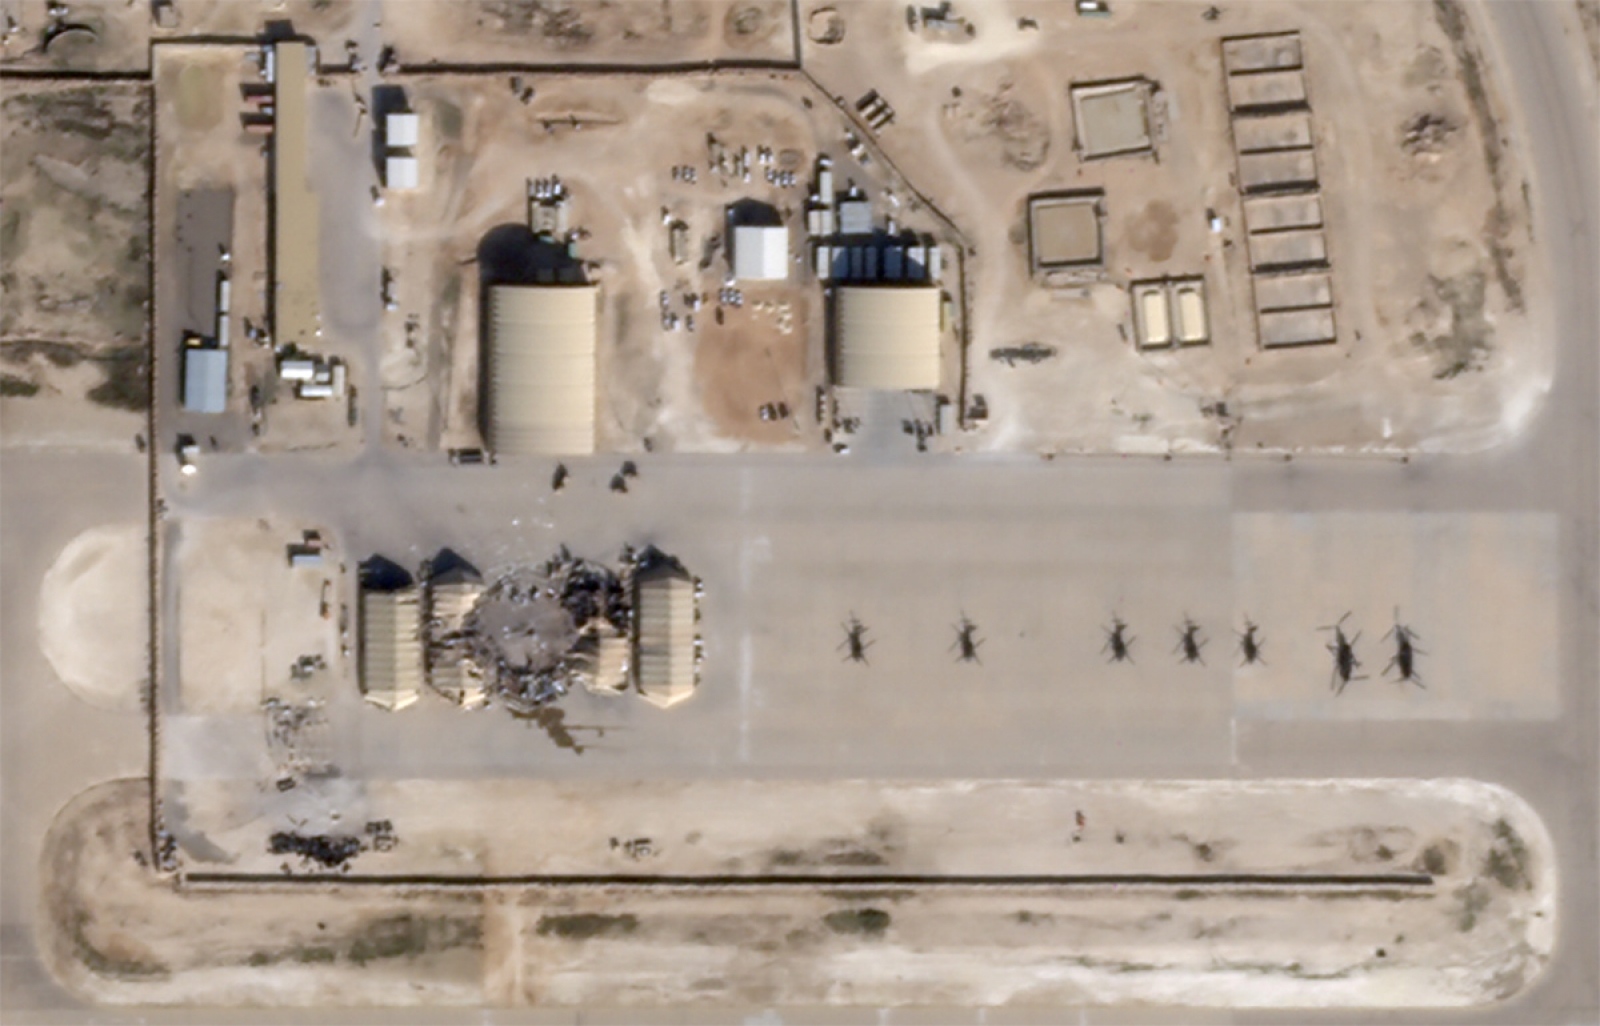 Damage at Al Asad air base in Iraq is seen in a satellite picture taken January 8, 2020 What appears to be new damage at Al Asad air base in Iraq is seen in a satellite picture taken January 8, 2020. Planet/Handout via REUTERS. NO RESALES. NO ARCHIVES. MANDATORY CREDIT. THIS IMAGE HAS BEEN SUPPLIED BY A THIRD PARTY. THIS IMAGE WAS PROCESSED BY REUTERS TO ENHANCE QUALITY, AN UNPROCESSED VERSION HAS BEEN PROVIDED SEPARATELY.     TPX IMAGES OF THE DAY PLANET